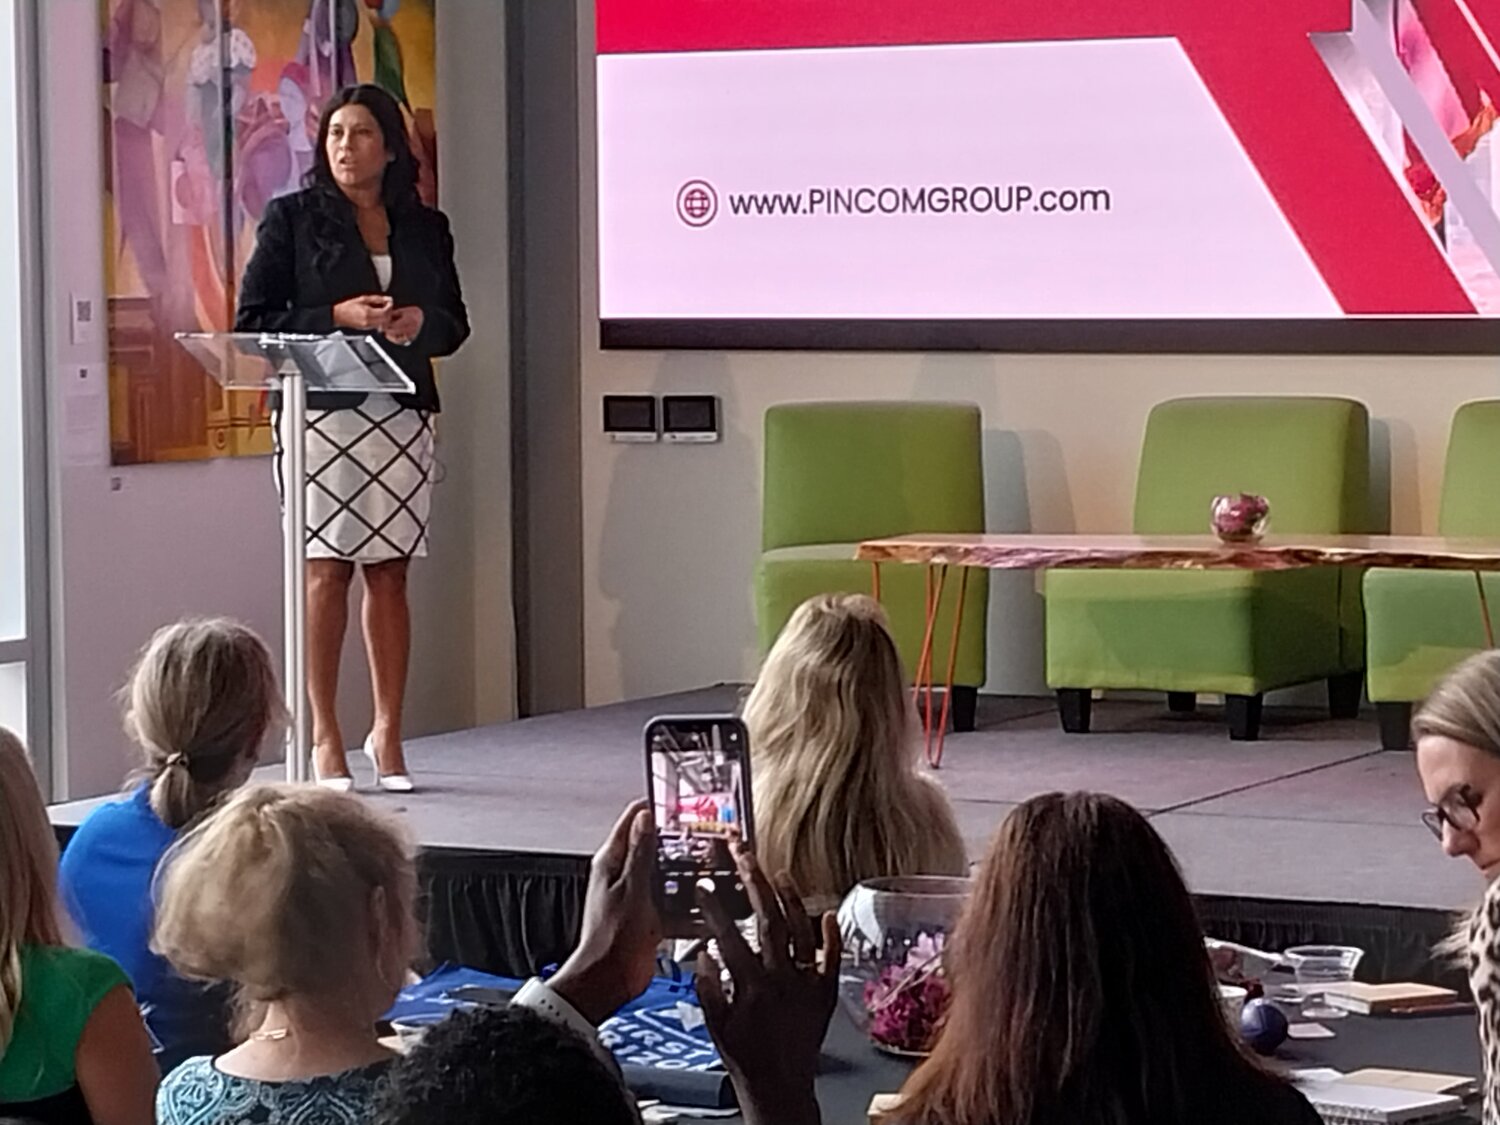 Sonya Morales-Marchisillo, CEO of Pinnacle Communications Group, speaks at EnterCircle 2023.